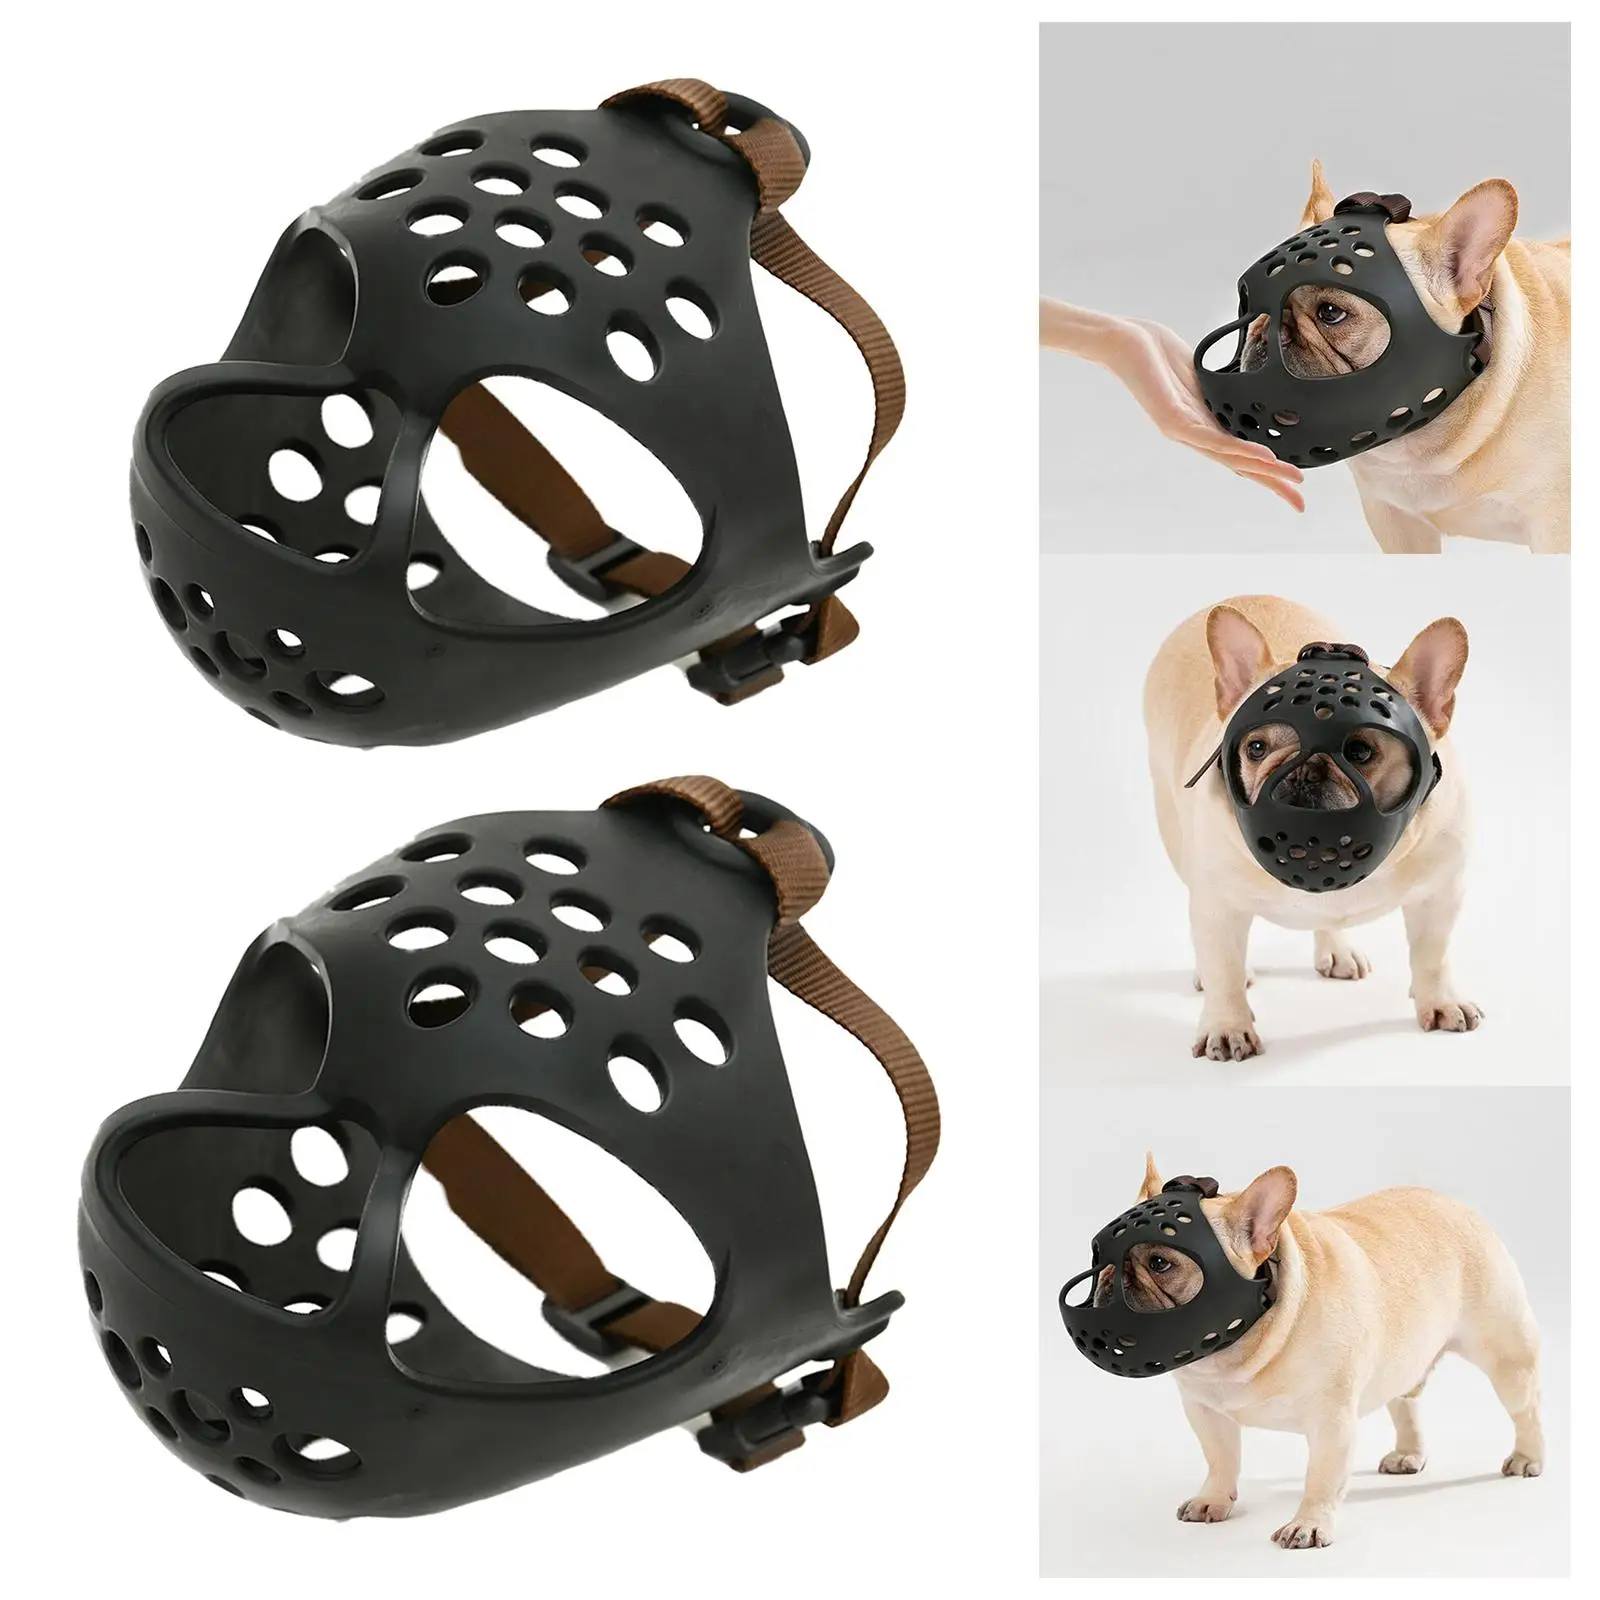 Pet Dog Muzzle Soft Cage Muzzle Mask Mouth Cover Lightweight Durable Comfortable Soft for Grooming Licking Biting Pet Supplies